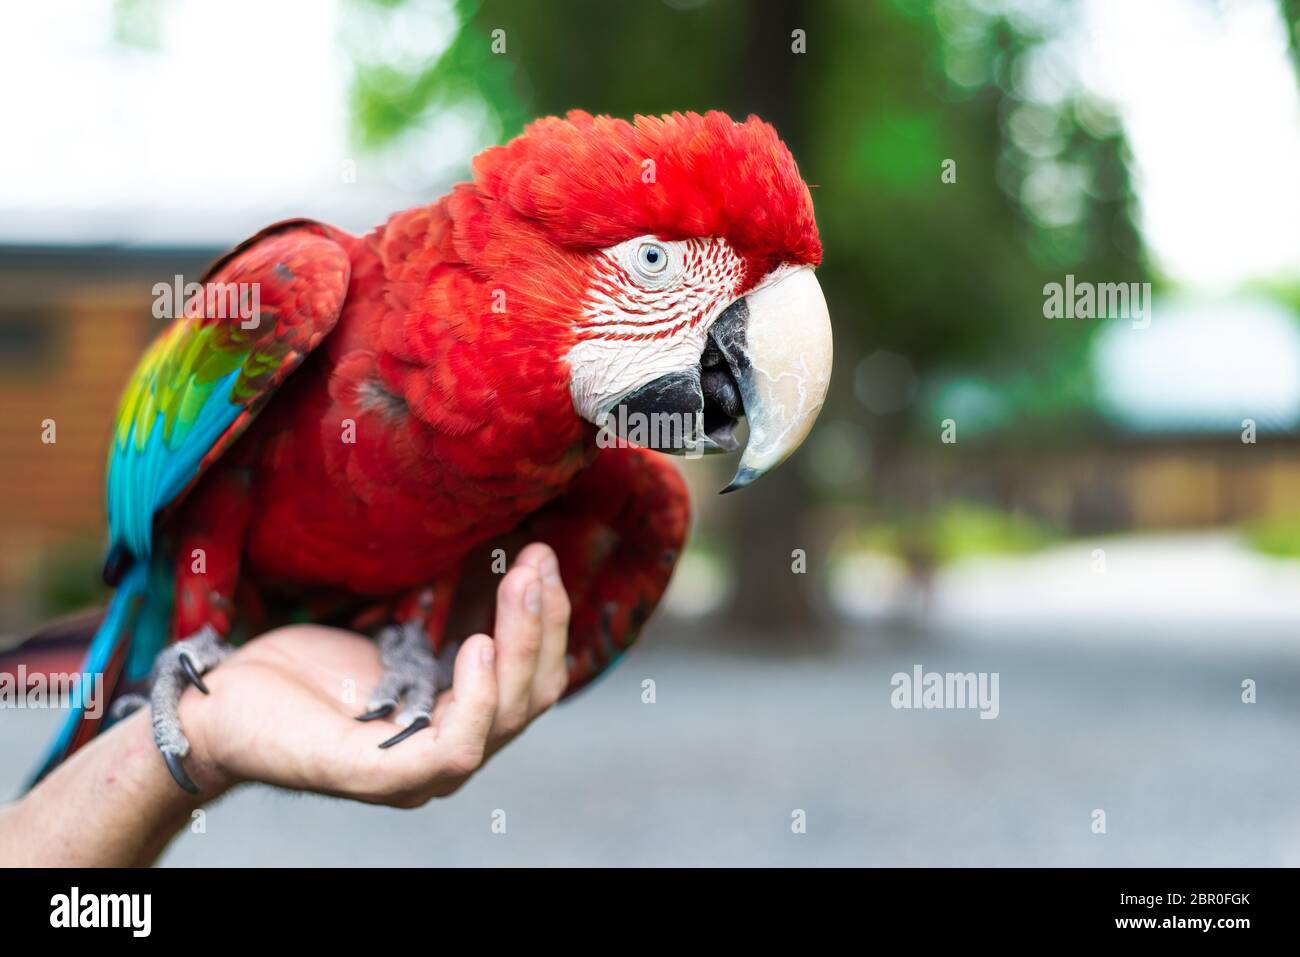 A red-and-green macaw perched on a human hand Stock Photo